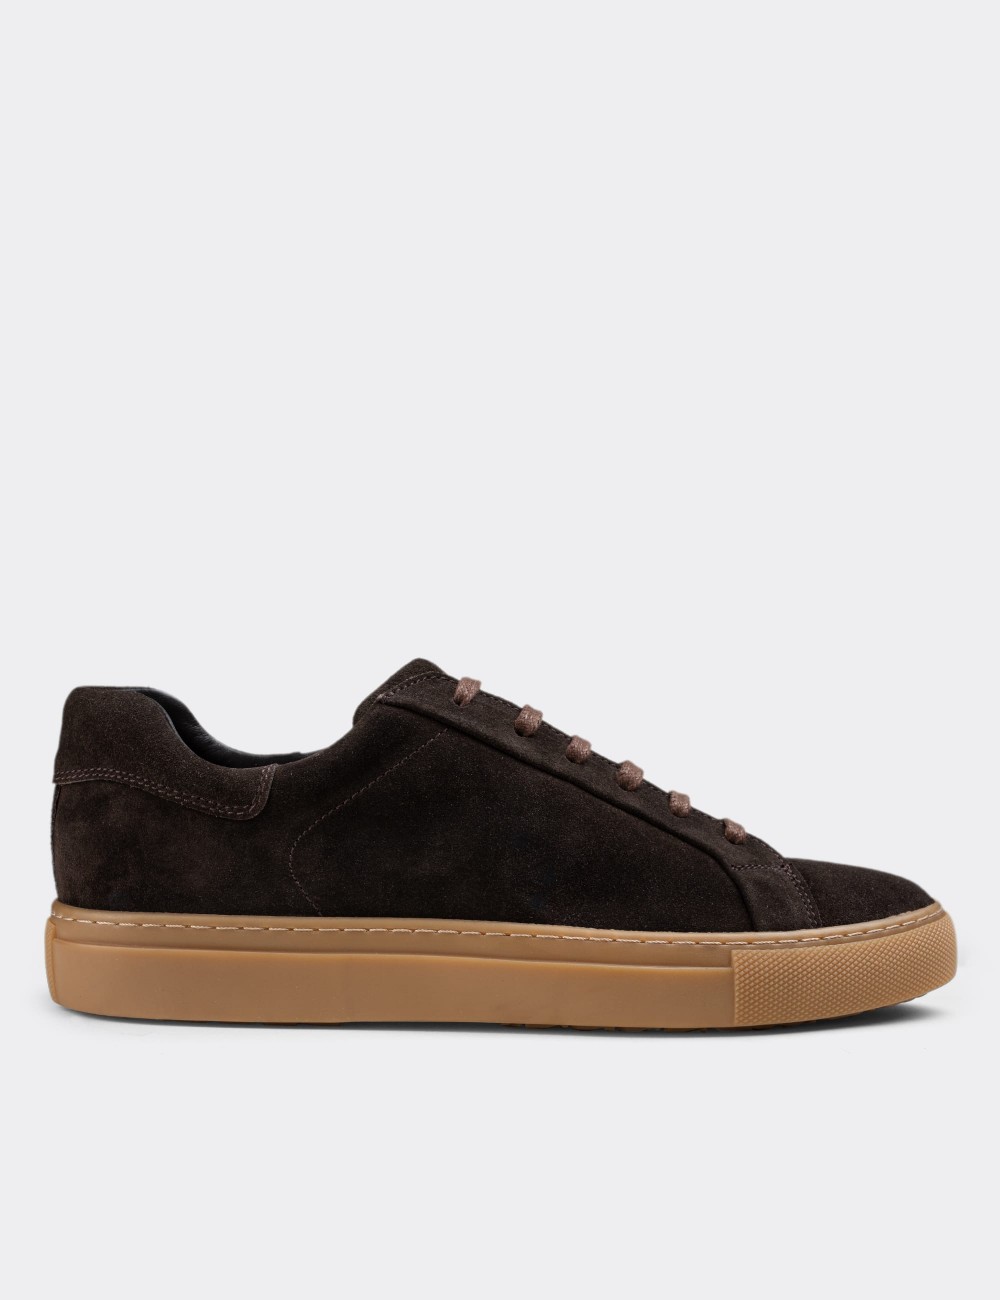 Brown Suede Leather Sneakers - 01829MKHVC01